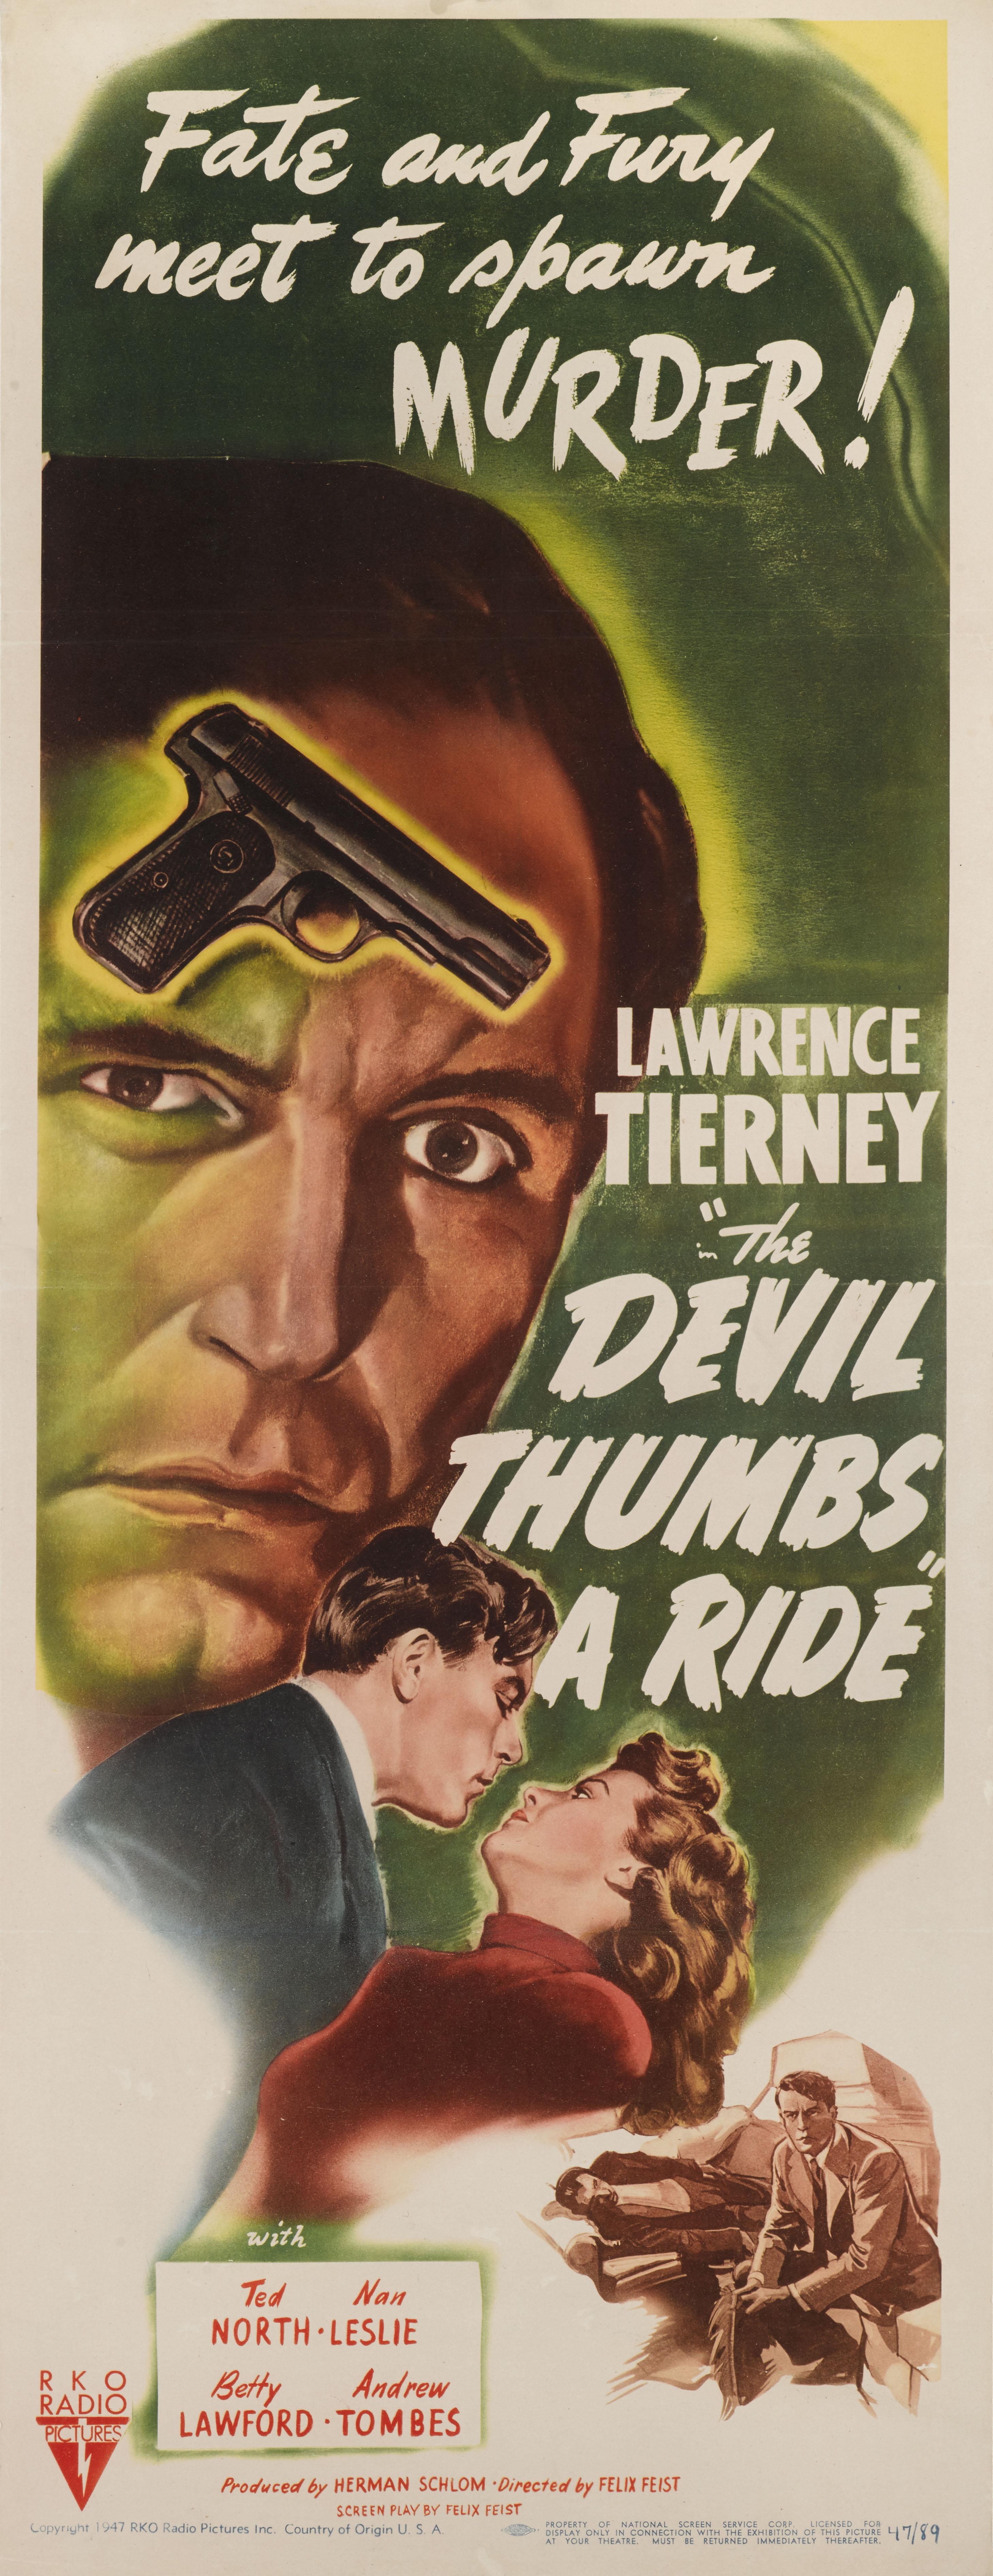 Original US film poster for the 1947 Film Noir starring Lawrence Tierney and Ted North and directed by Felix E. Feist.
This poster is conservation paper backed and it would be shipped flat in strong card and sent by Federal express.
   